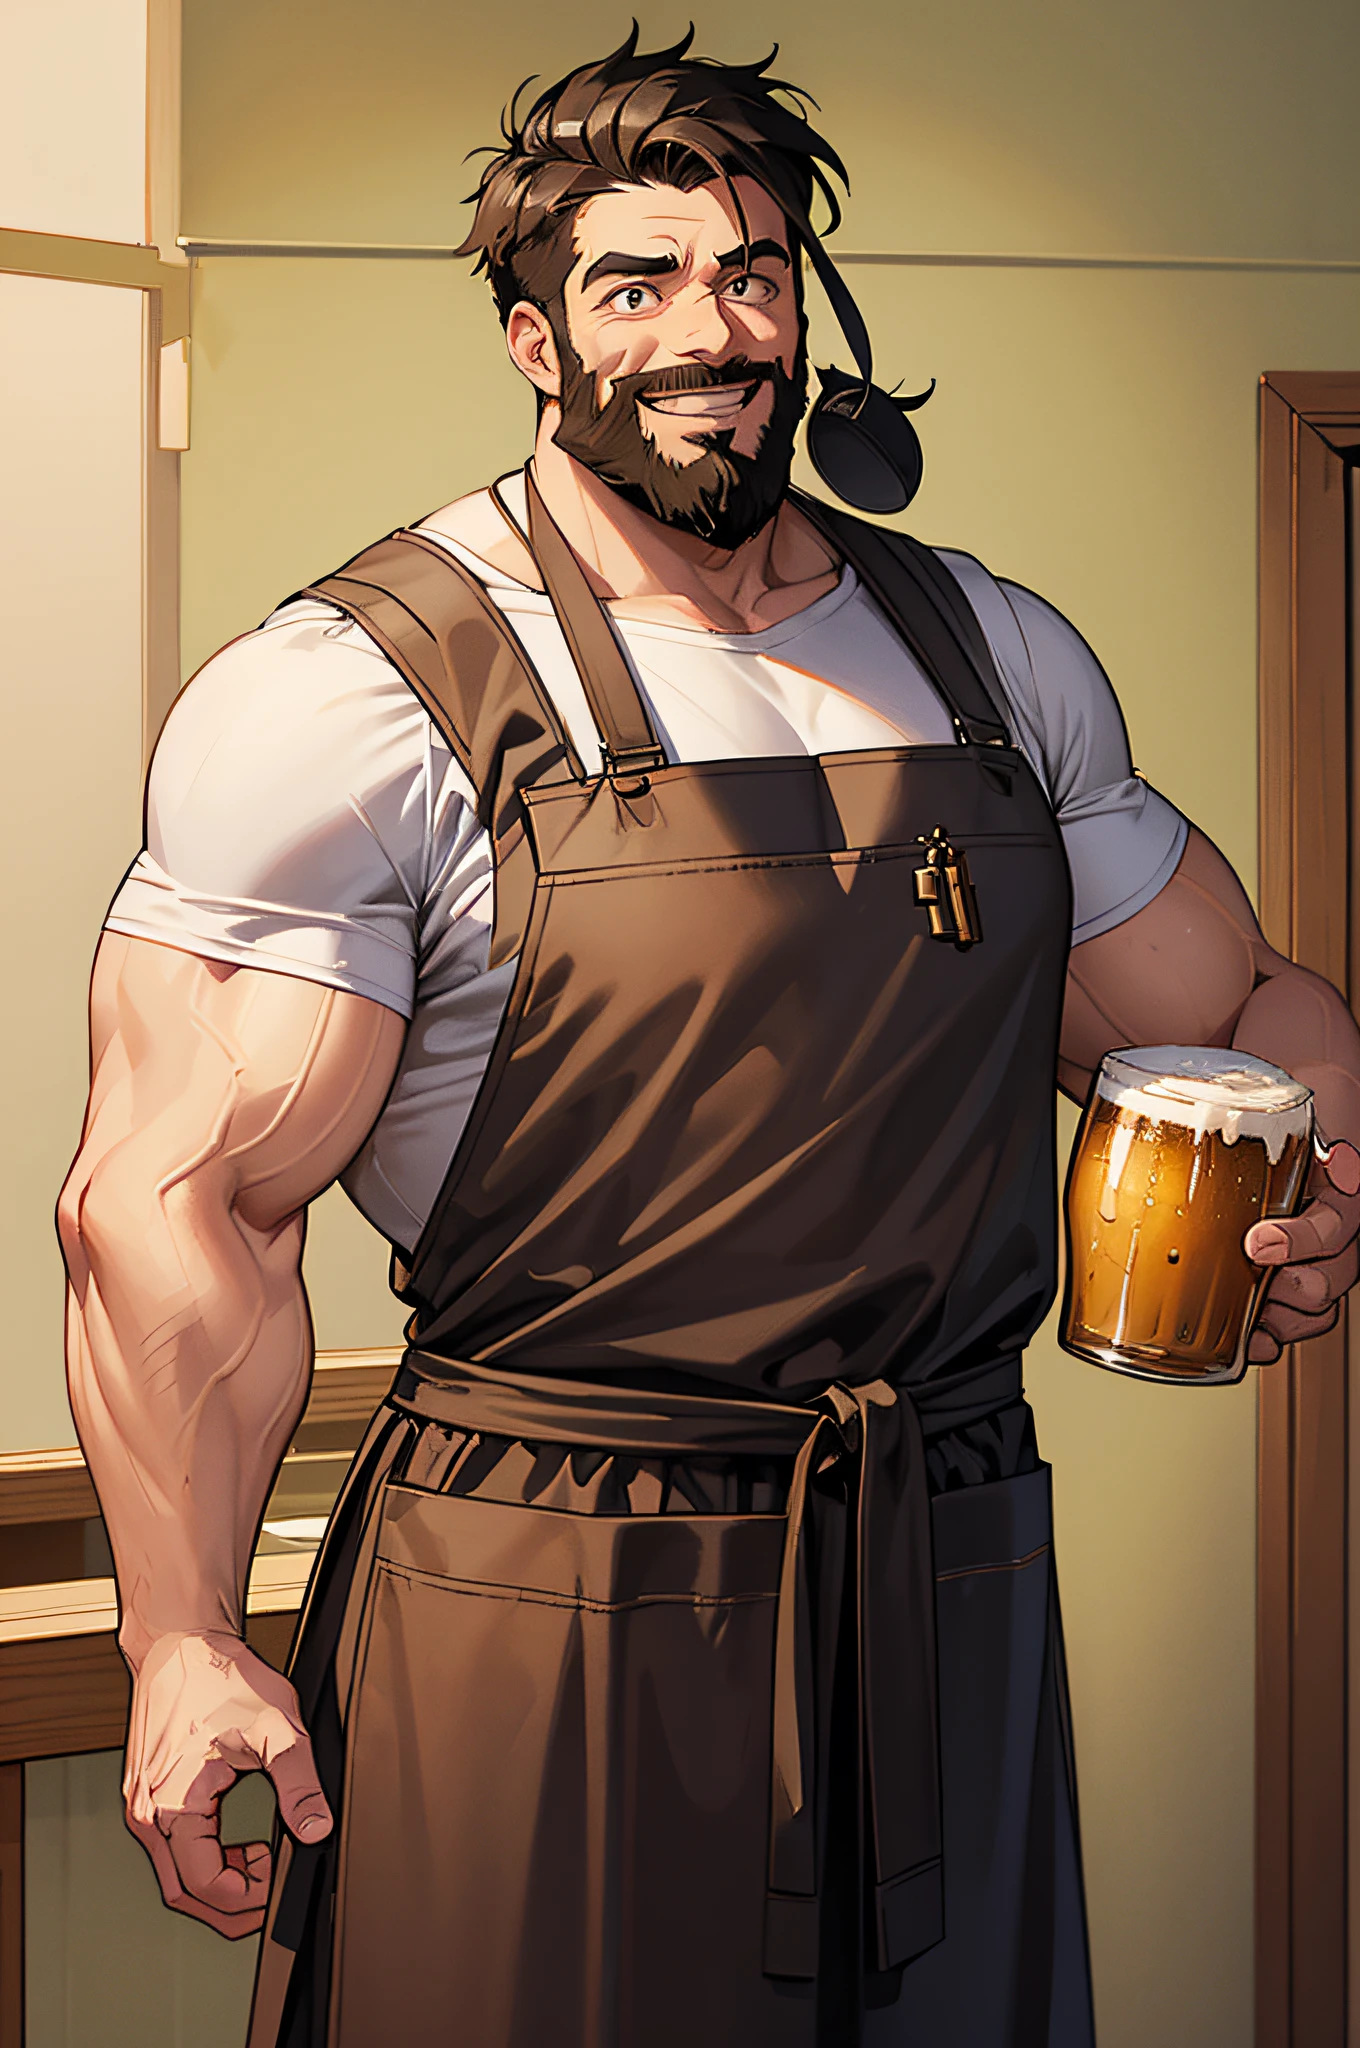 Smiling bearded man，Large muscle cords，Wearing an apron around the chest，Wiping wooden beer mug on hand，A key chain around the waist，Style anime style，cartoony，Warm。